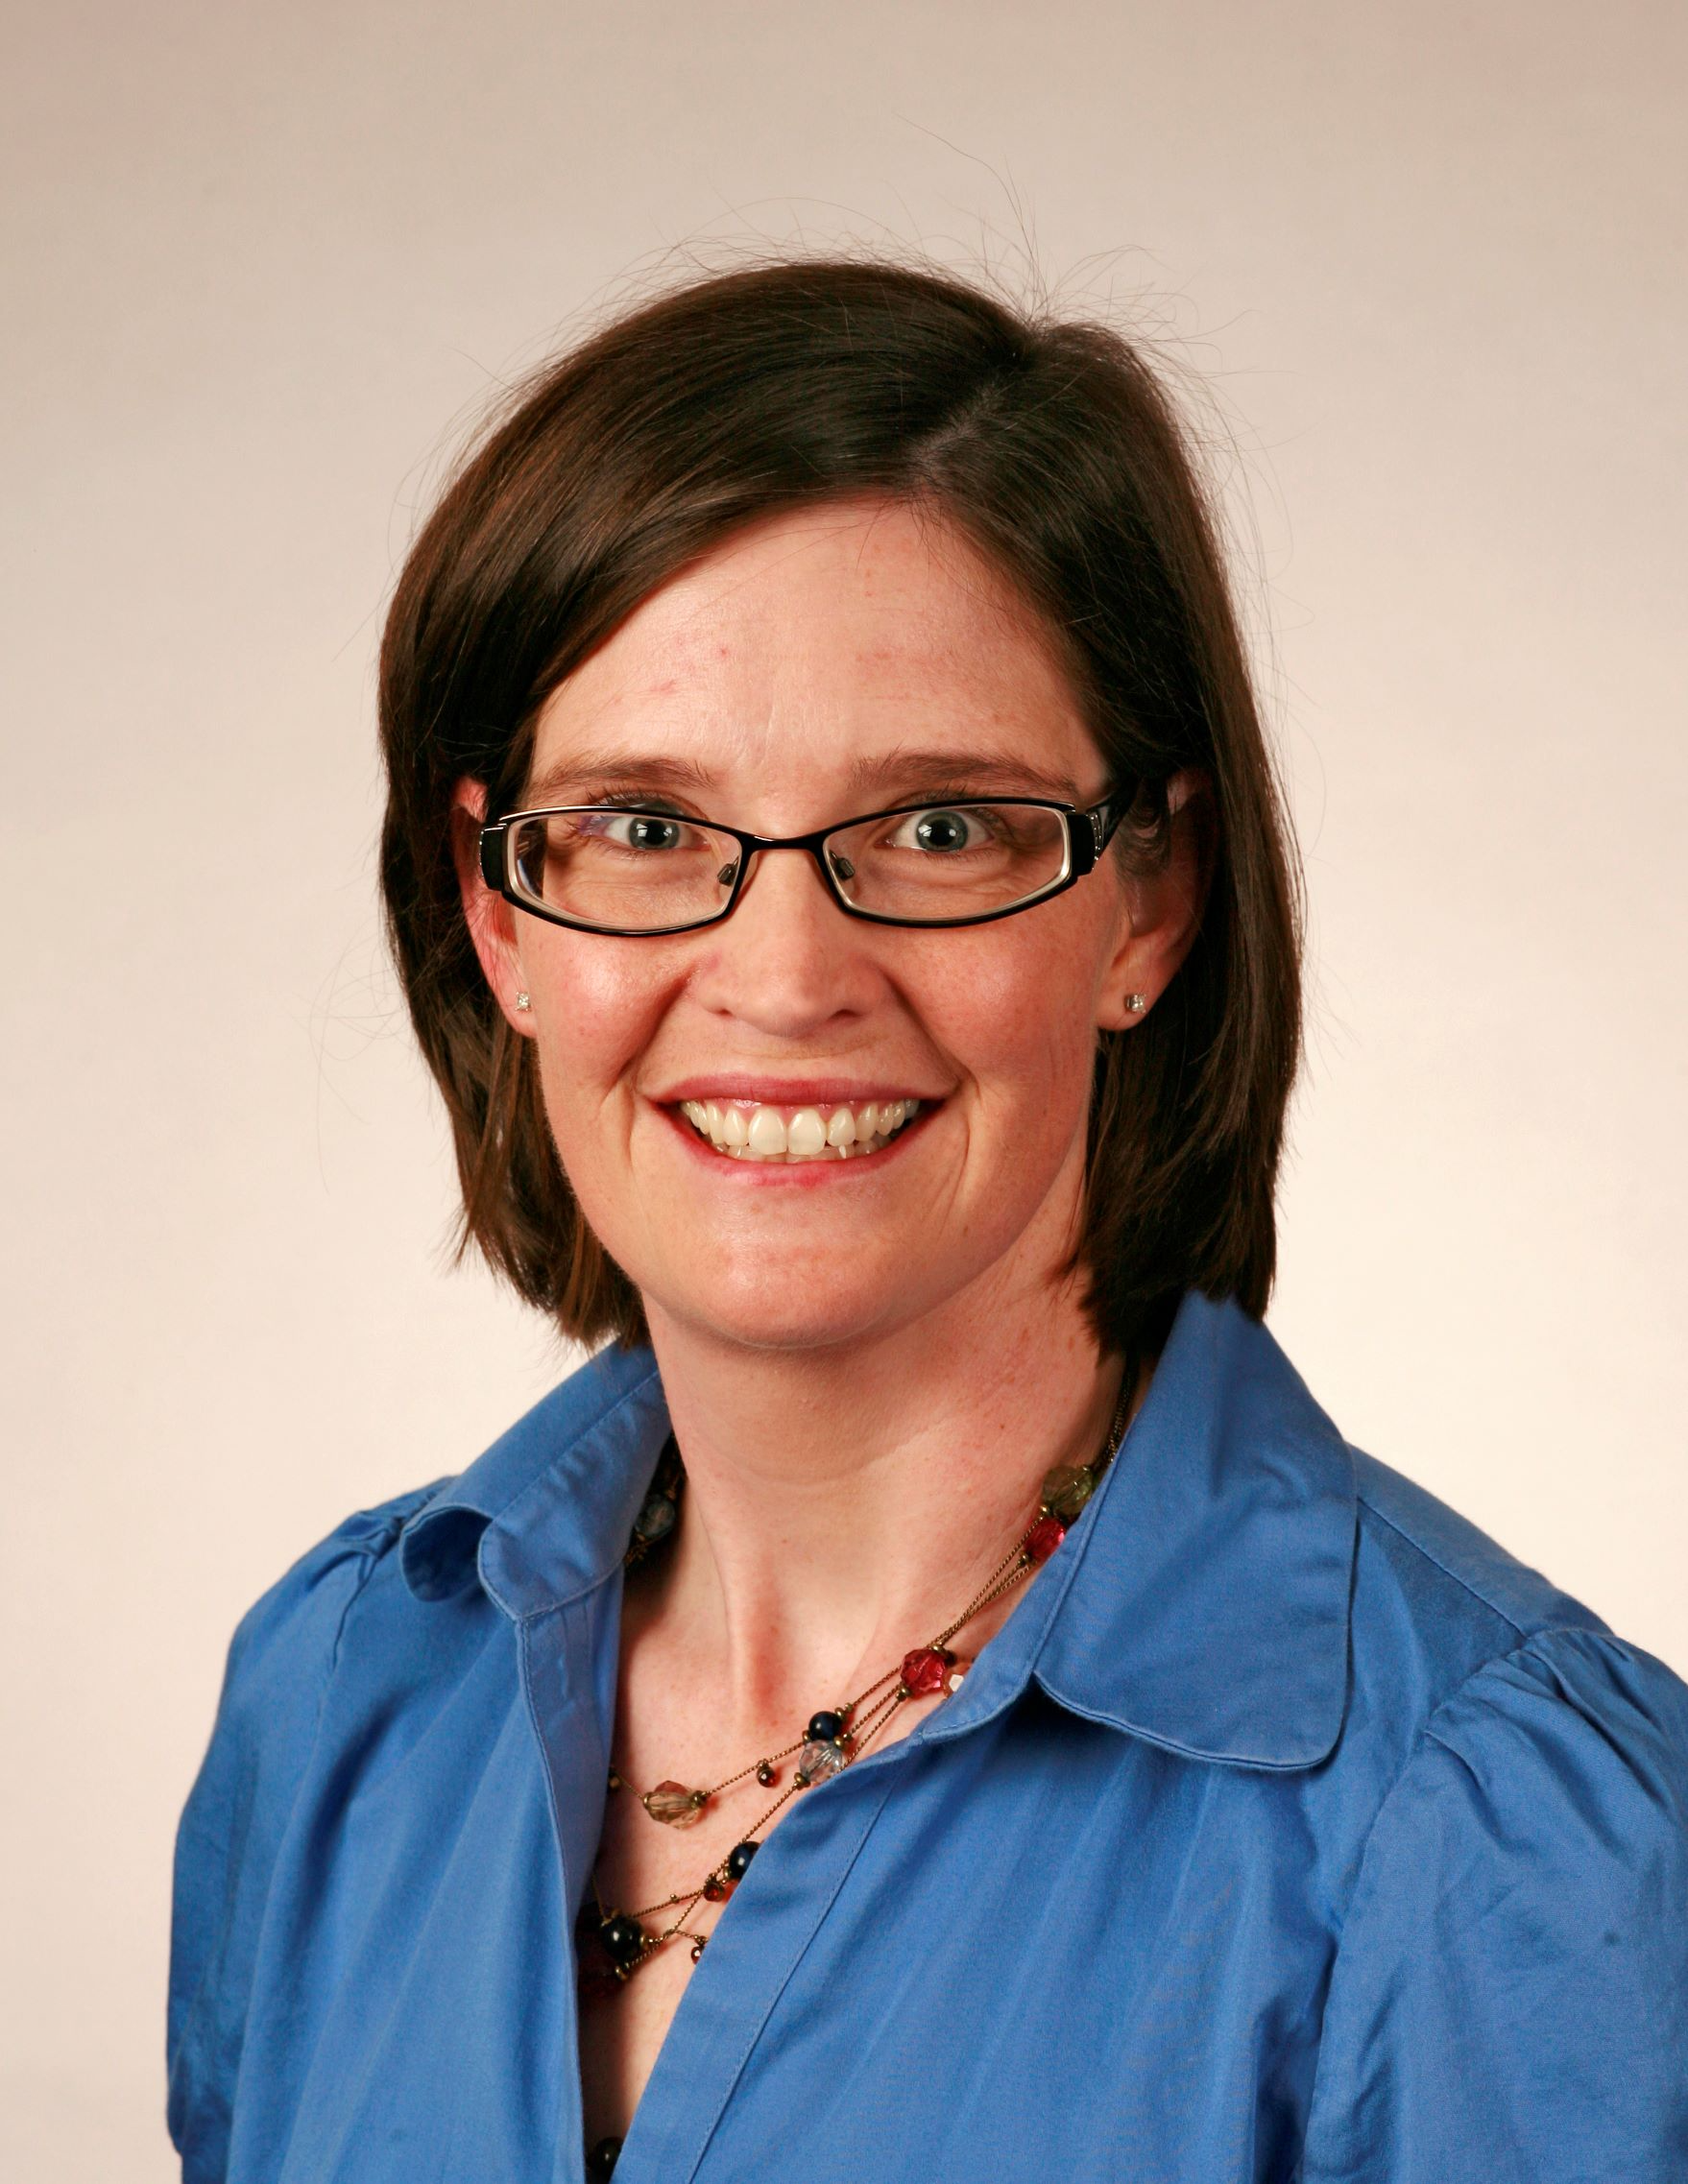 A picture of a woman with short, brunette hair with glasses smiling. She is wearing a blue blouse with a colored necklace.